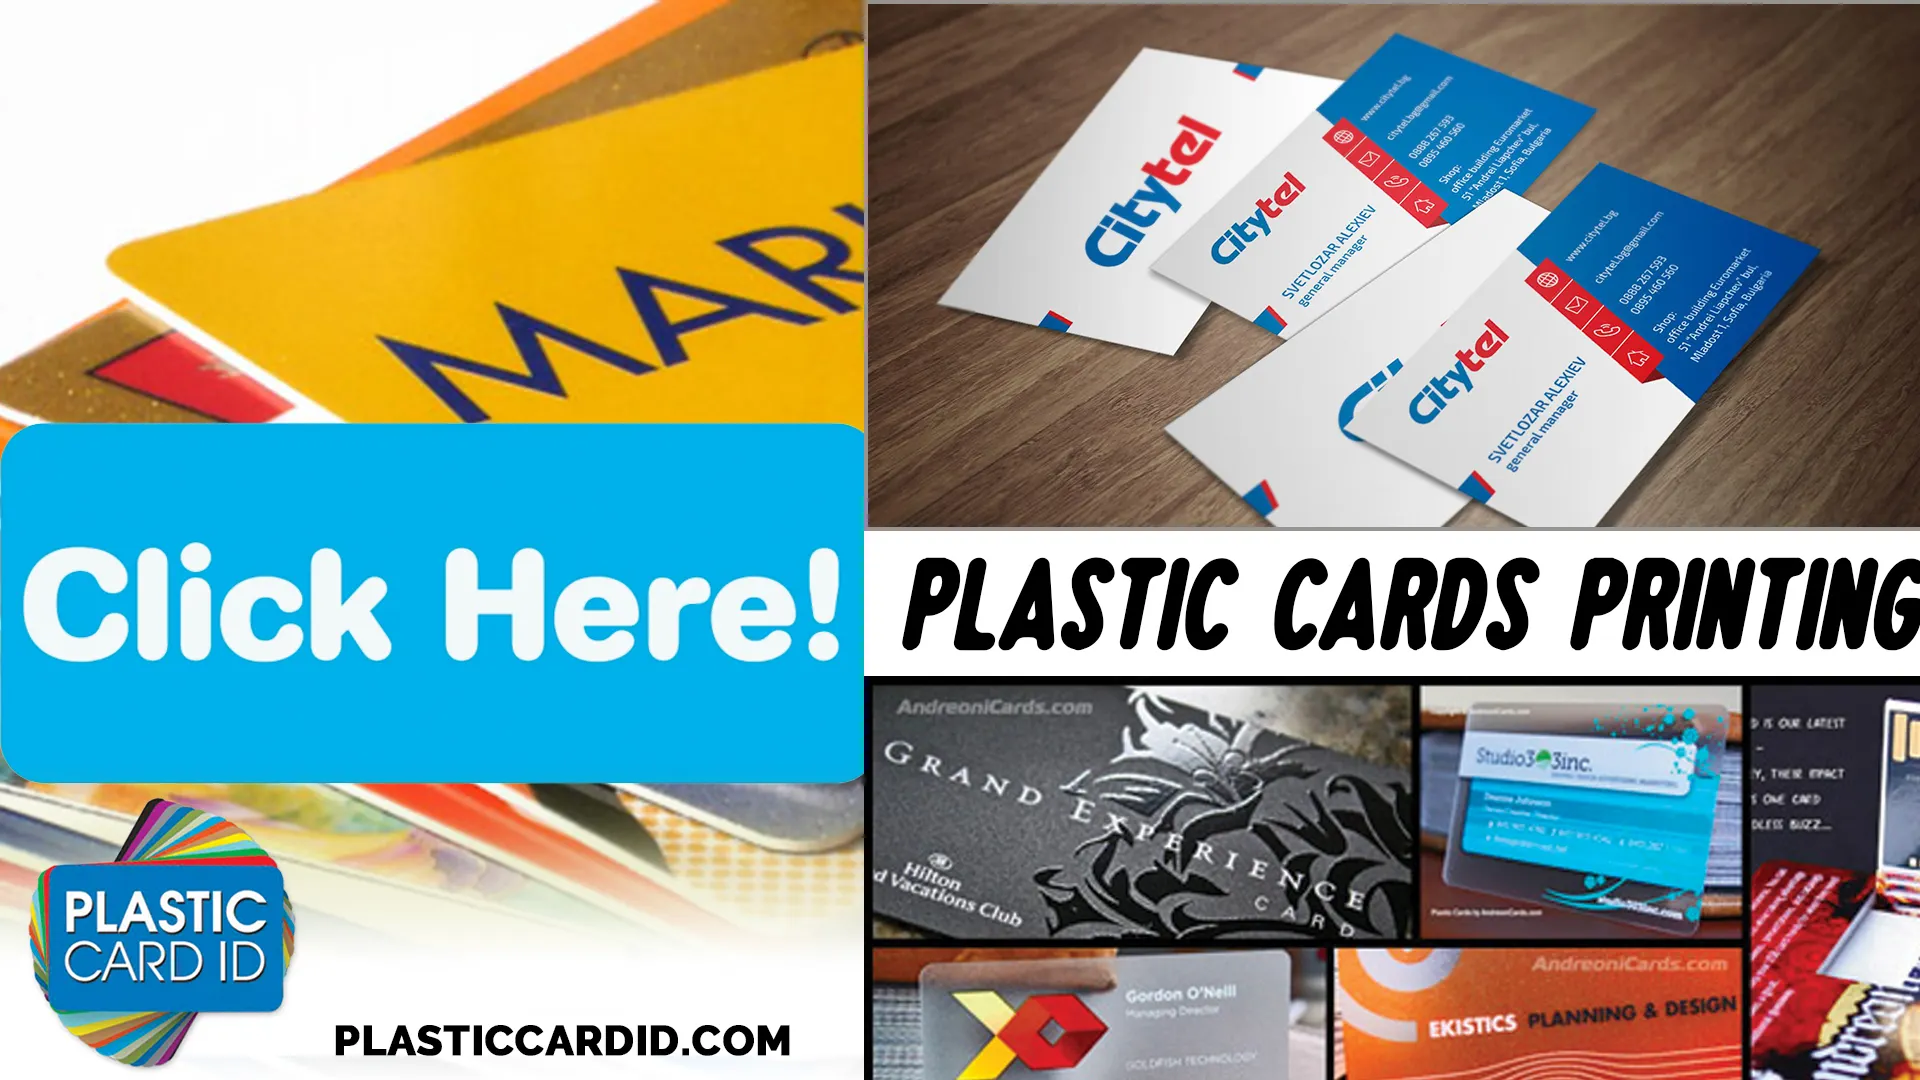 How We Manage Plastic Card Disposal